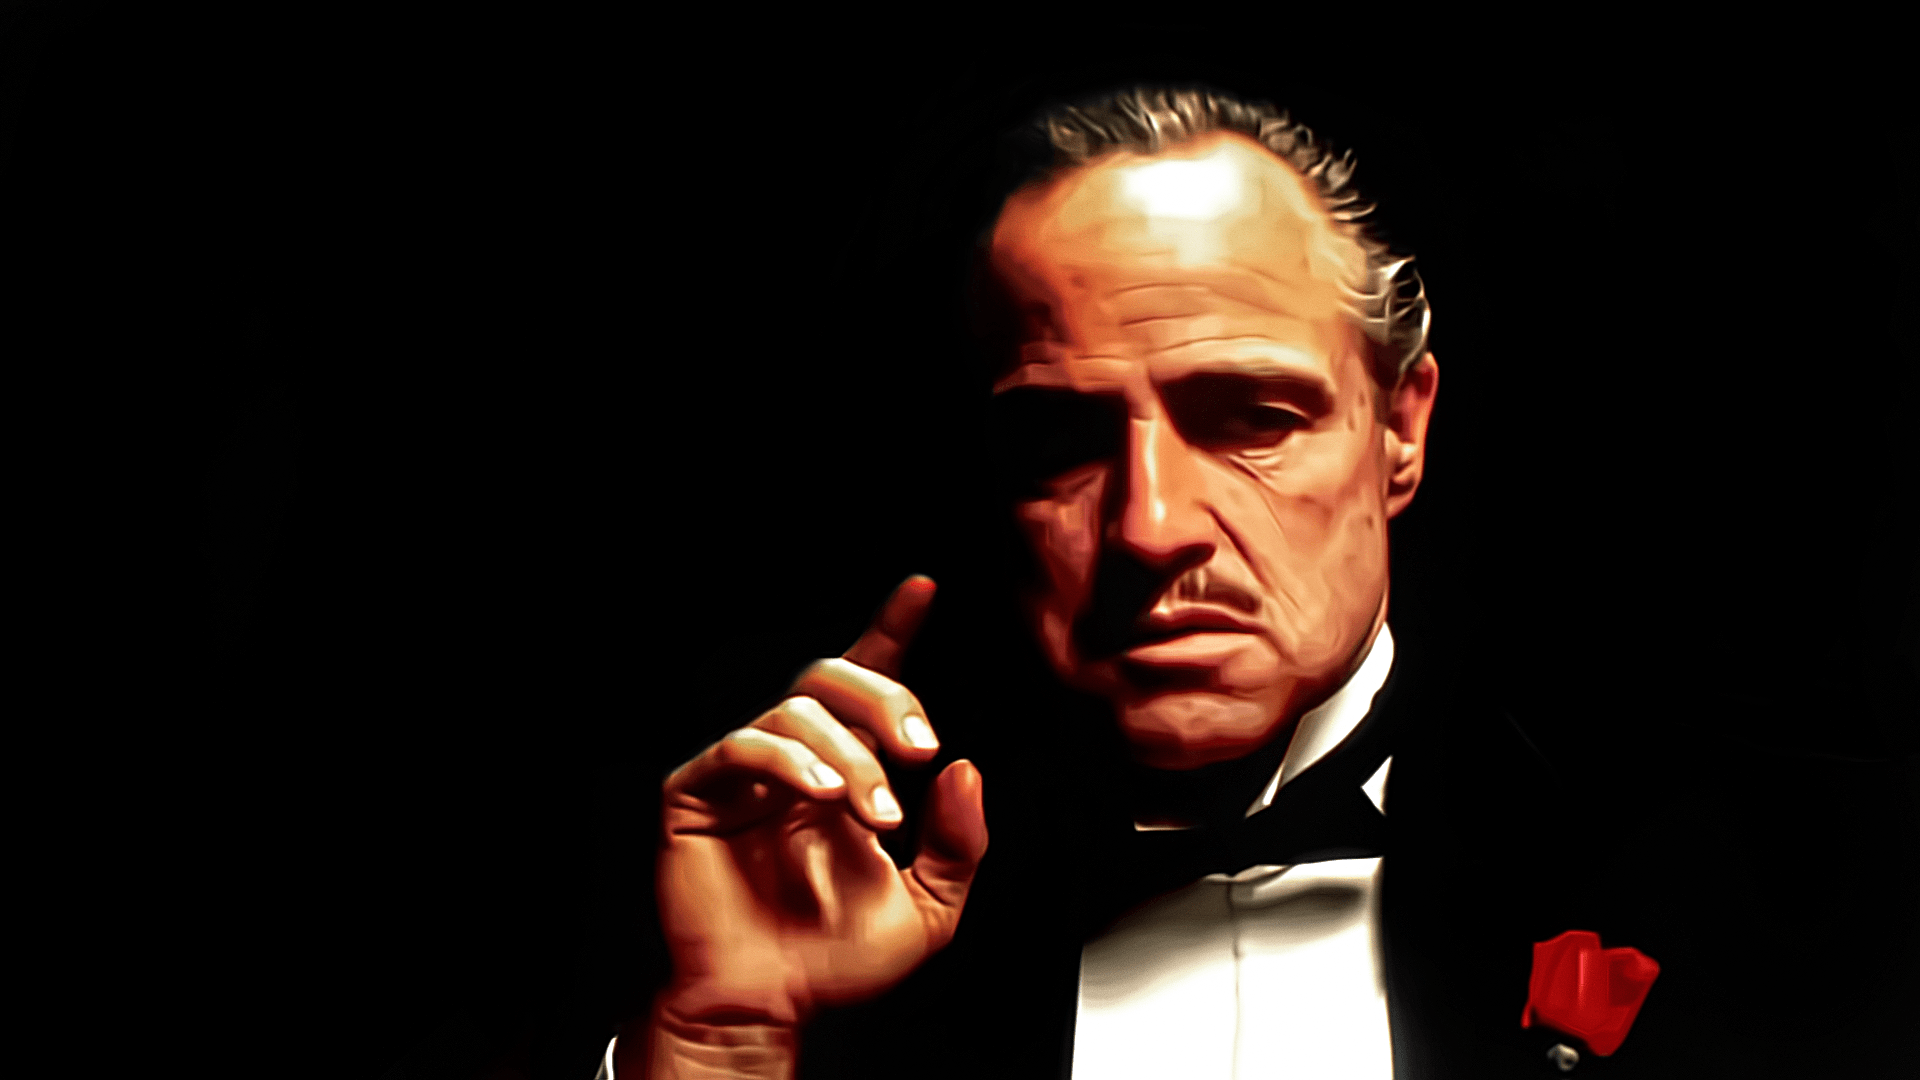 Wallpaper For > The Godfather Wallpaper